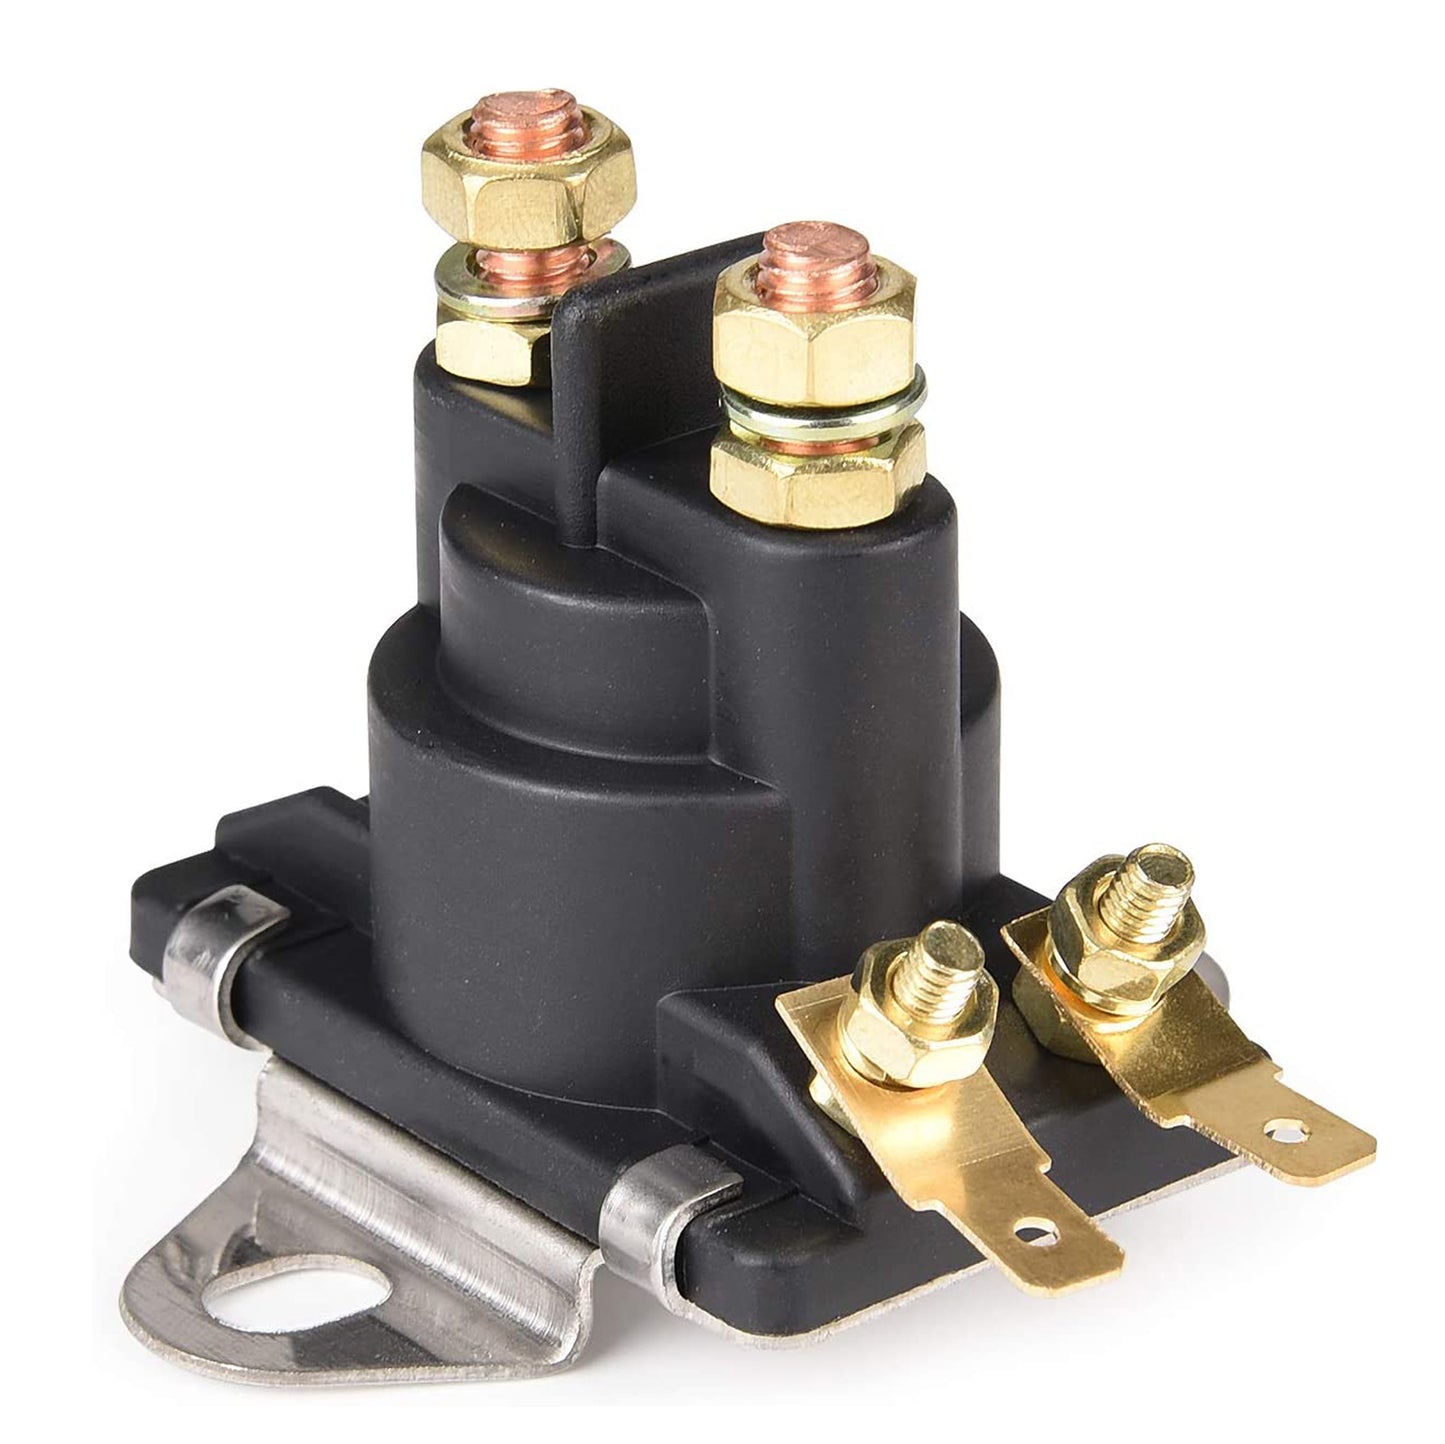 89-818864T Starter Solenoid Relay 12V Compatible With Mercury and Mariner outboards from 35 HP to 275HP